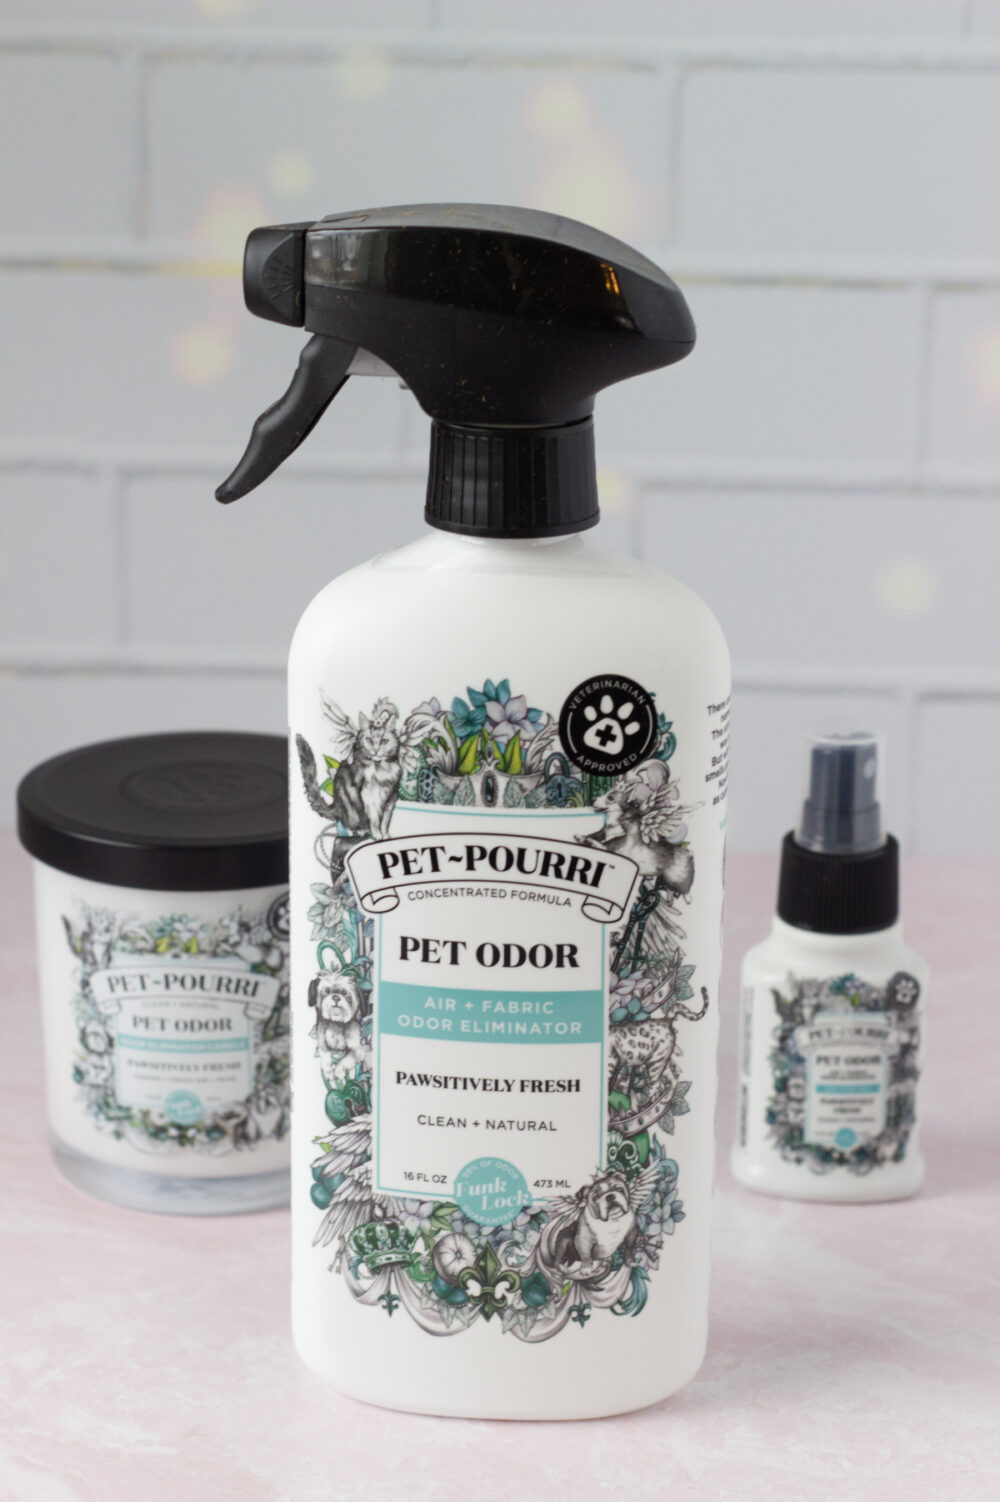 Pet-pourri spray and candle. 